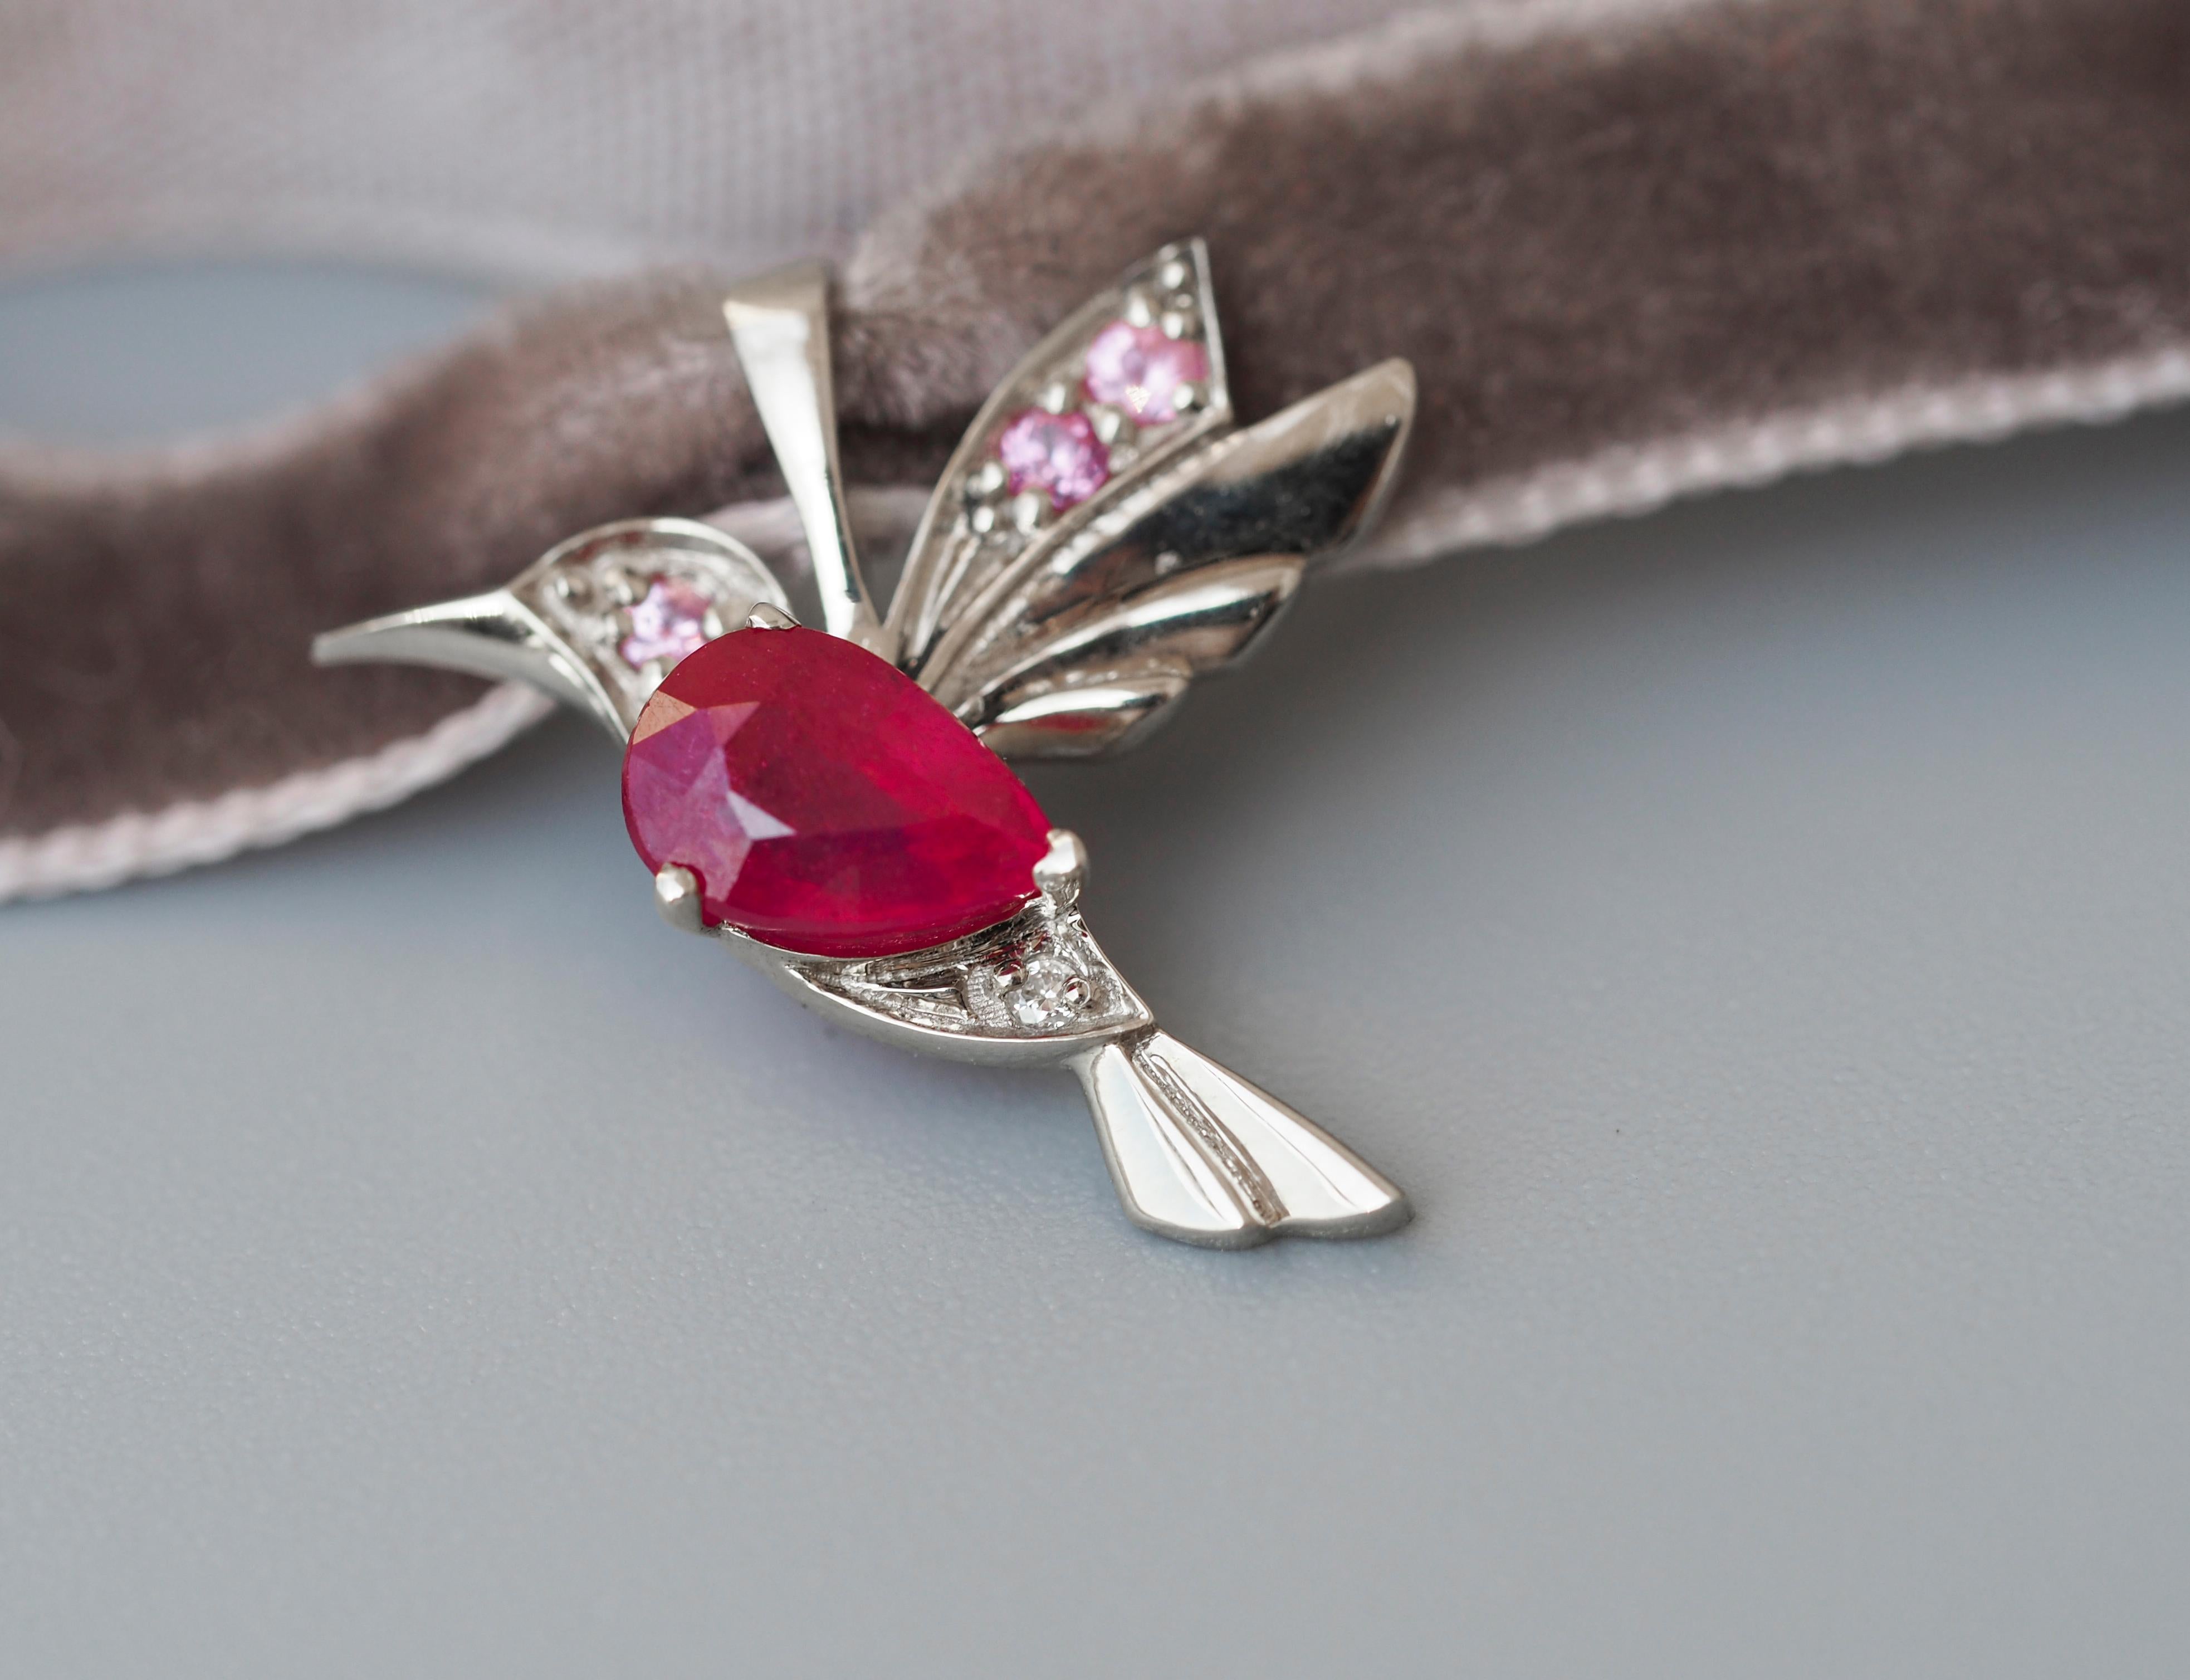 Hummingbird pendant with ruby. 
Pear ruby 14k gold pendant. July birthstone pendant. Gold bird pendant. Small bird pendant with gemstones.

Metal: 14k gold
Weight: 0.9 g.
Size: 12x16.6mm.

Set with ruby, color - red
Pear cut, 0.7 ct. in total (6x4